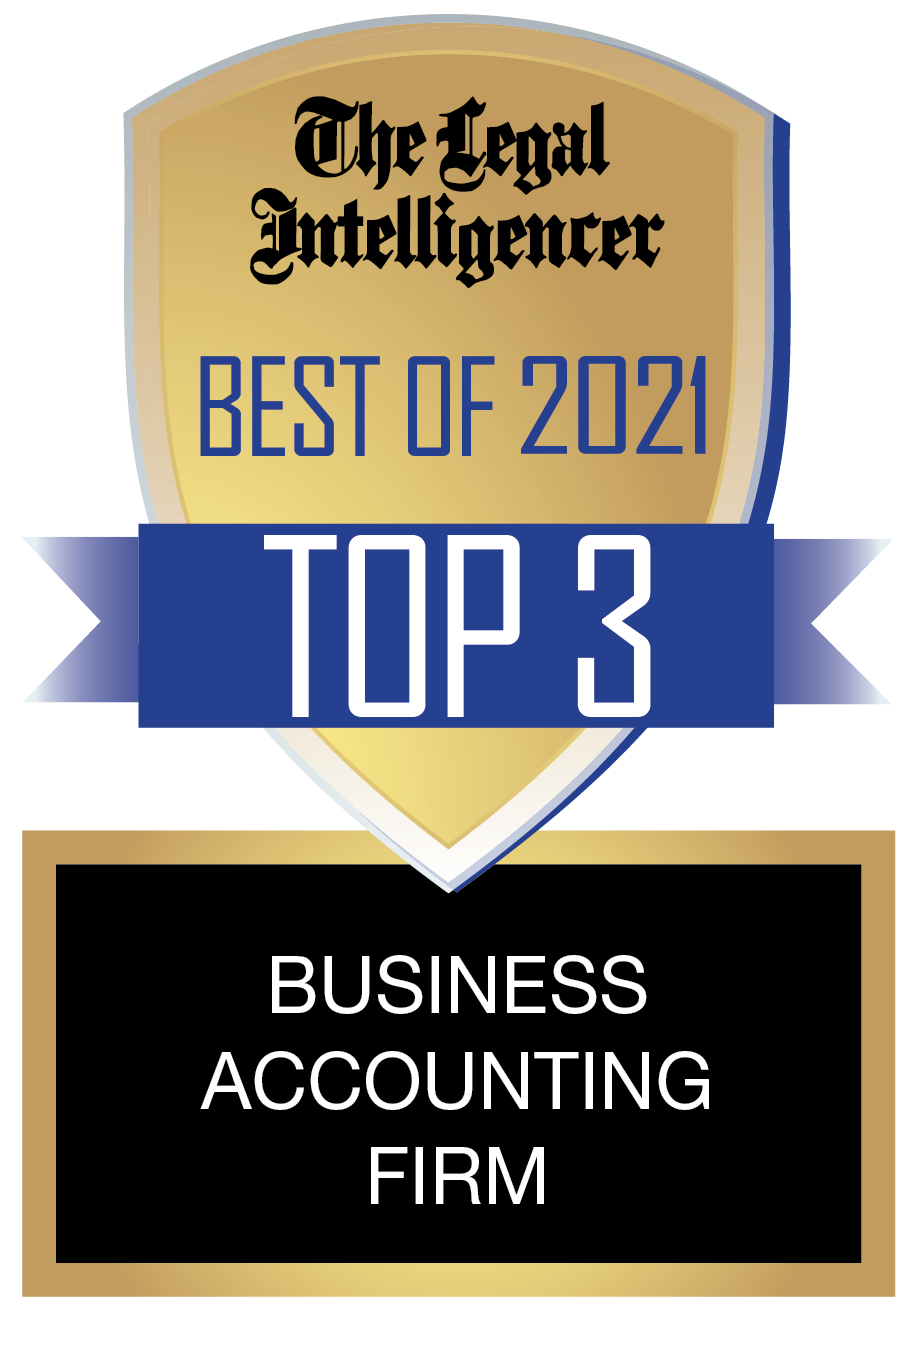 Legal Intelligencer - Top 3 Accounting Firm 2021